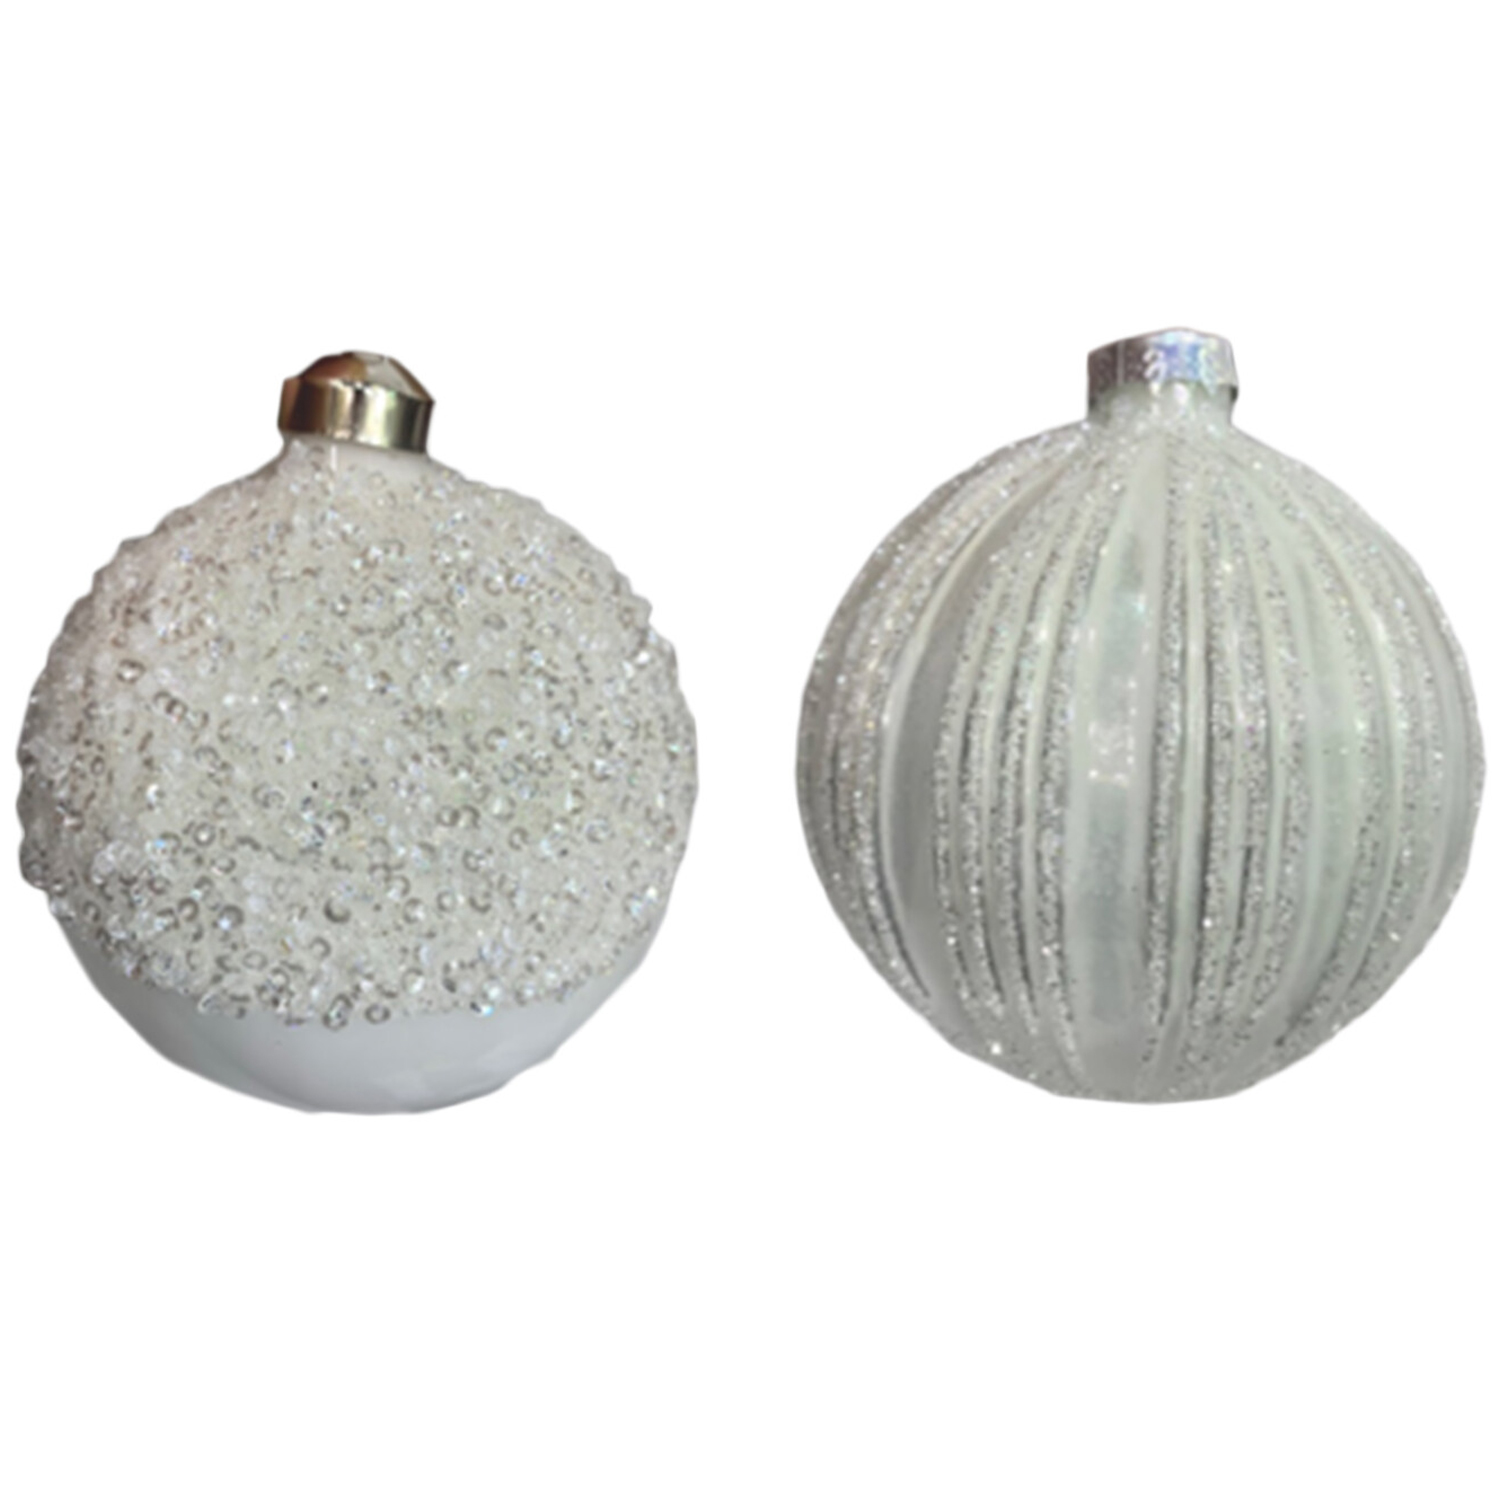 Single Mistletoe Cottage White Glitter Topped Bauble in Assorted styles Image